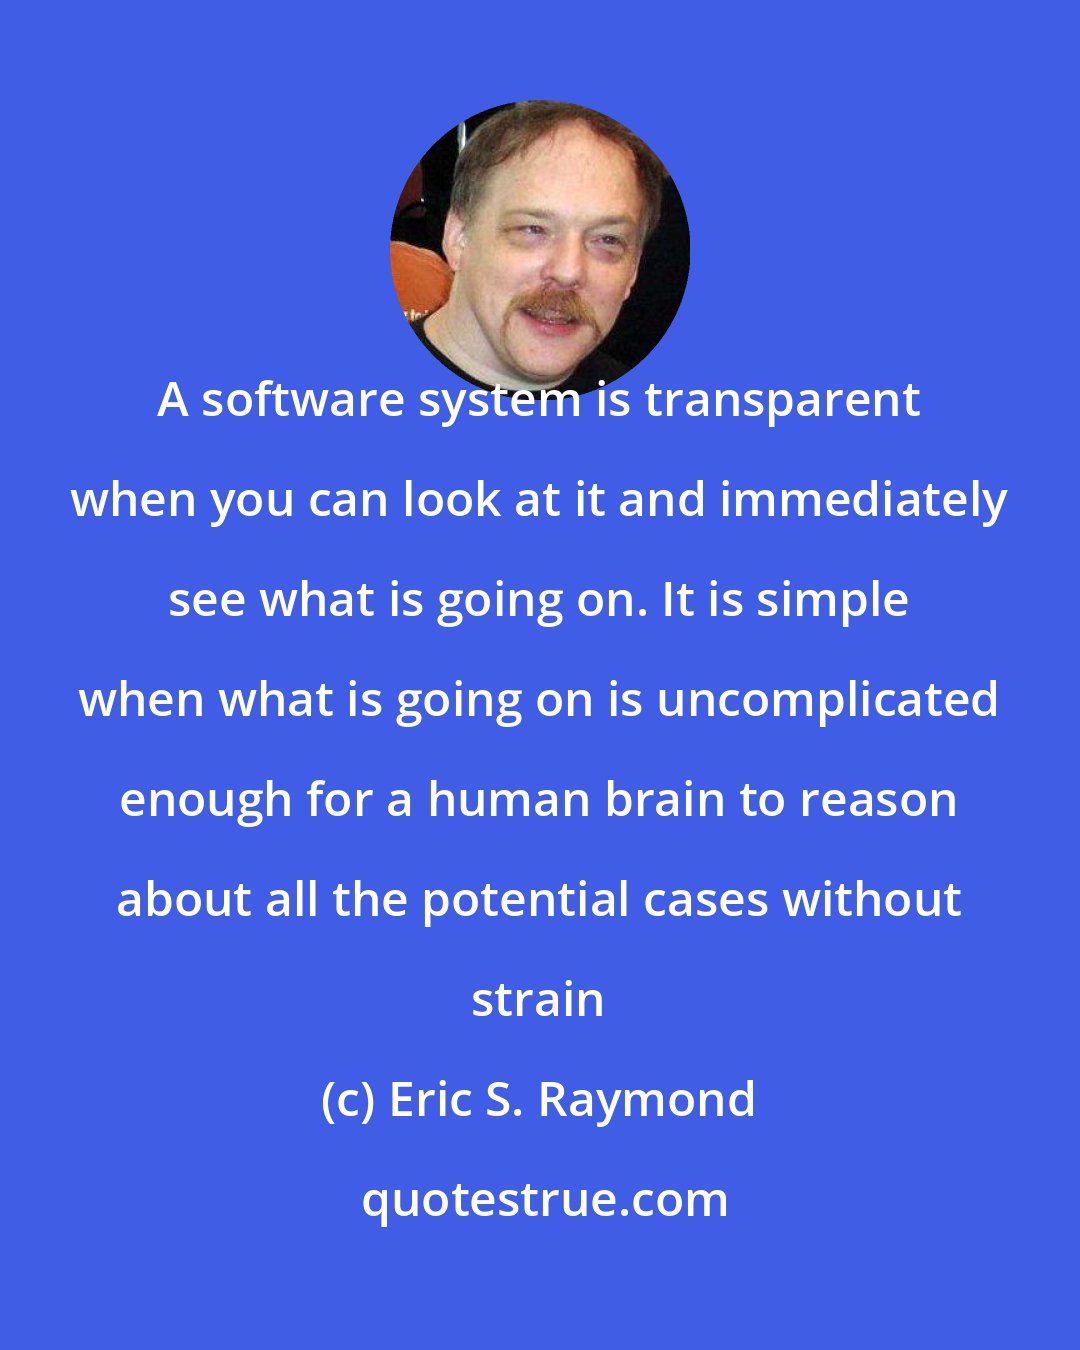 Eric S. Raymond: A software system is transparent when you can look at it and immediately see what is going on. It is simple when what is going on is uncomplicated enough for a human brain to reason about all the potential cases without strain